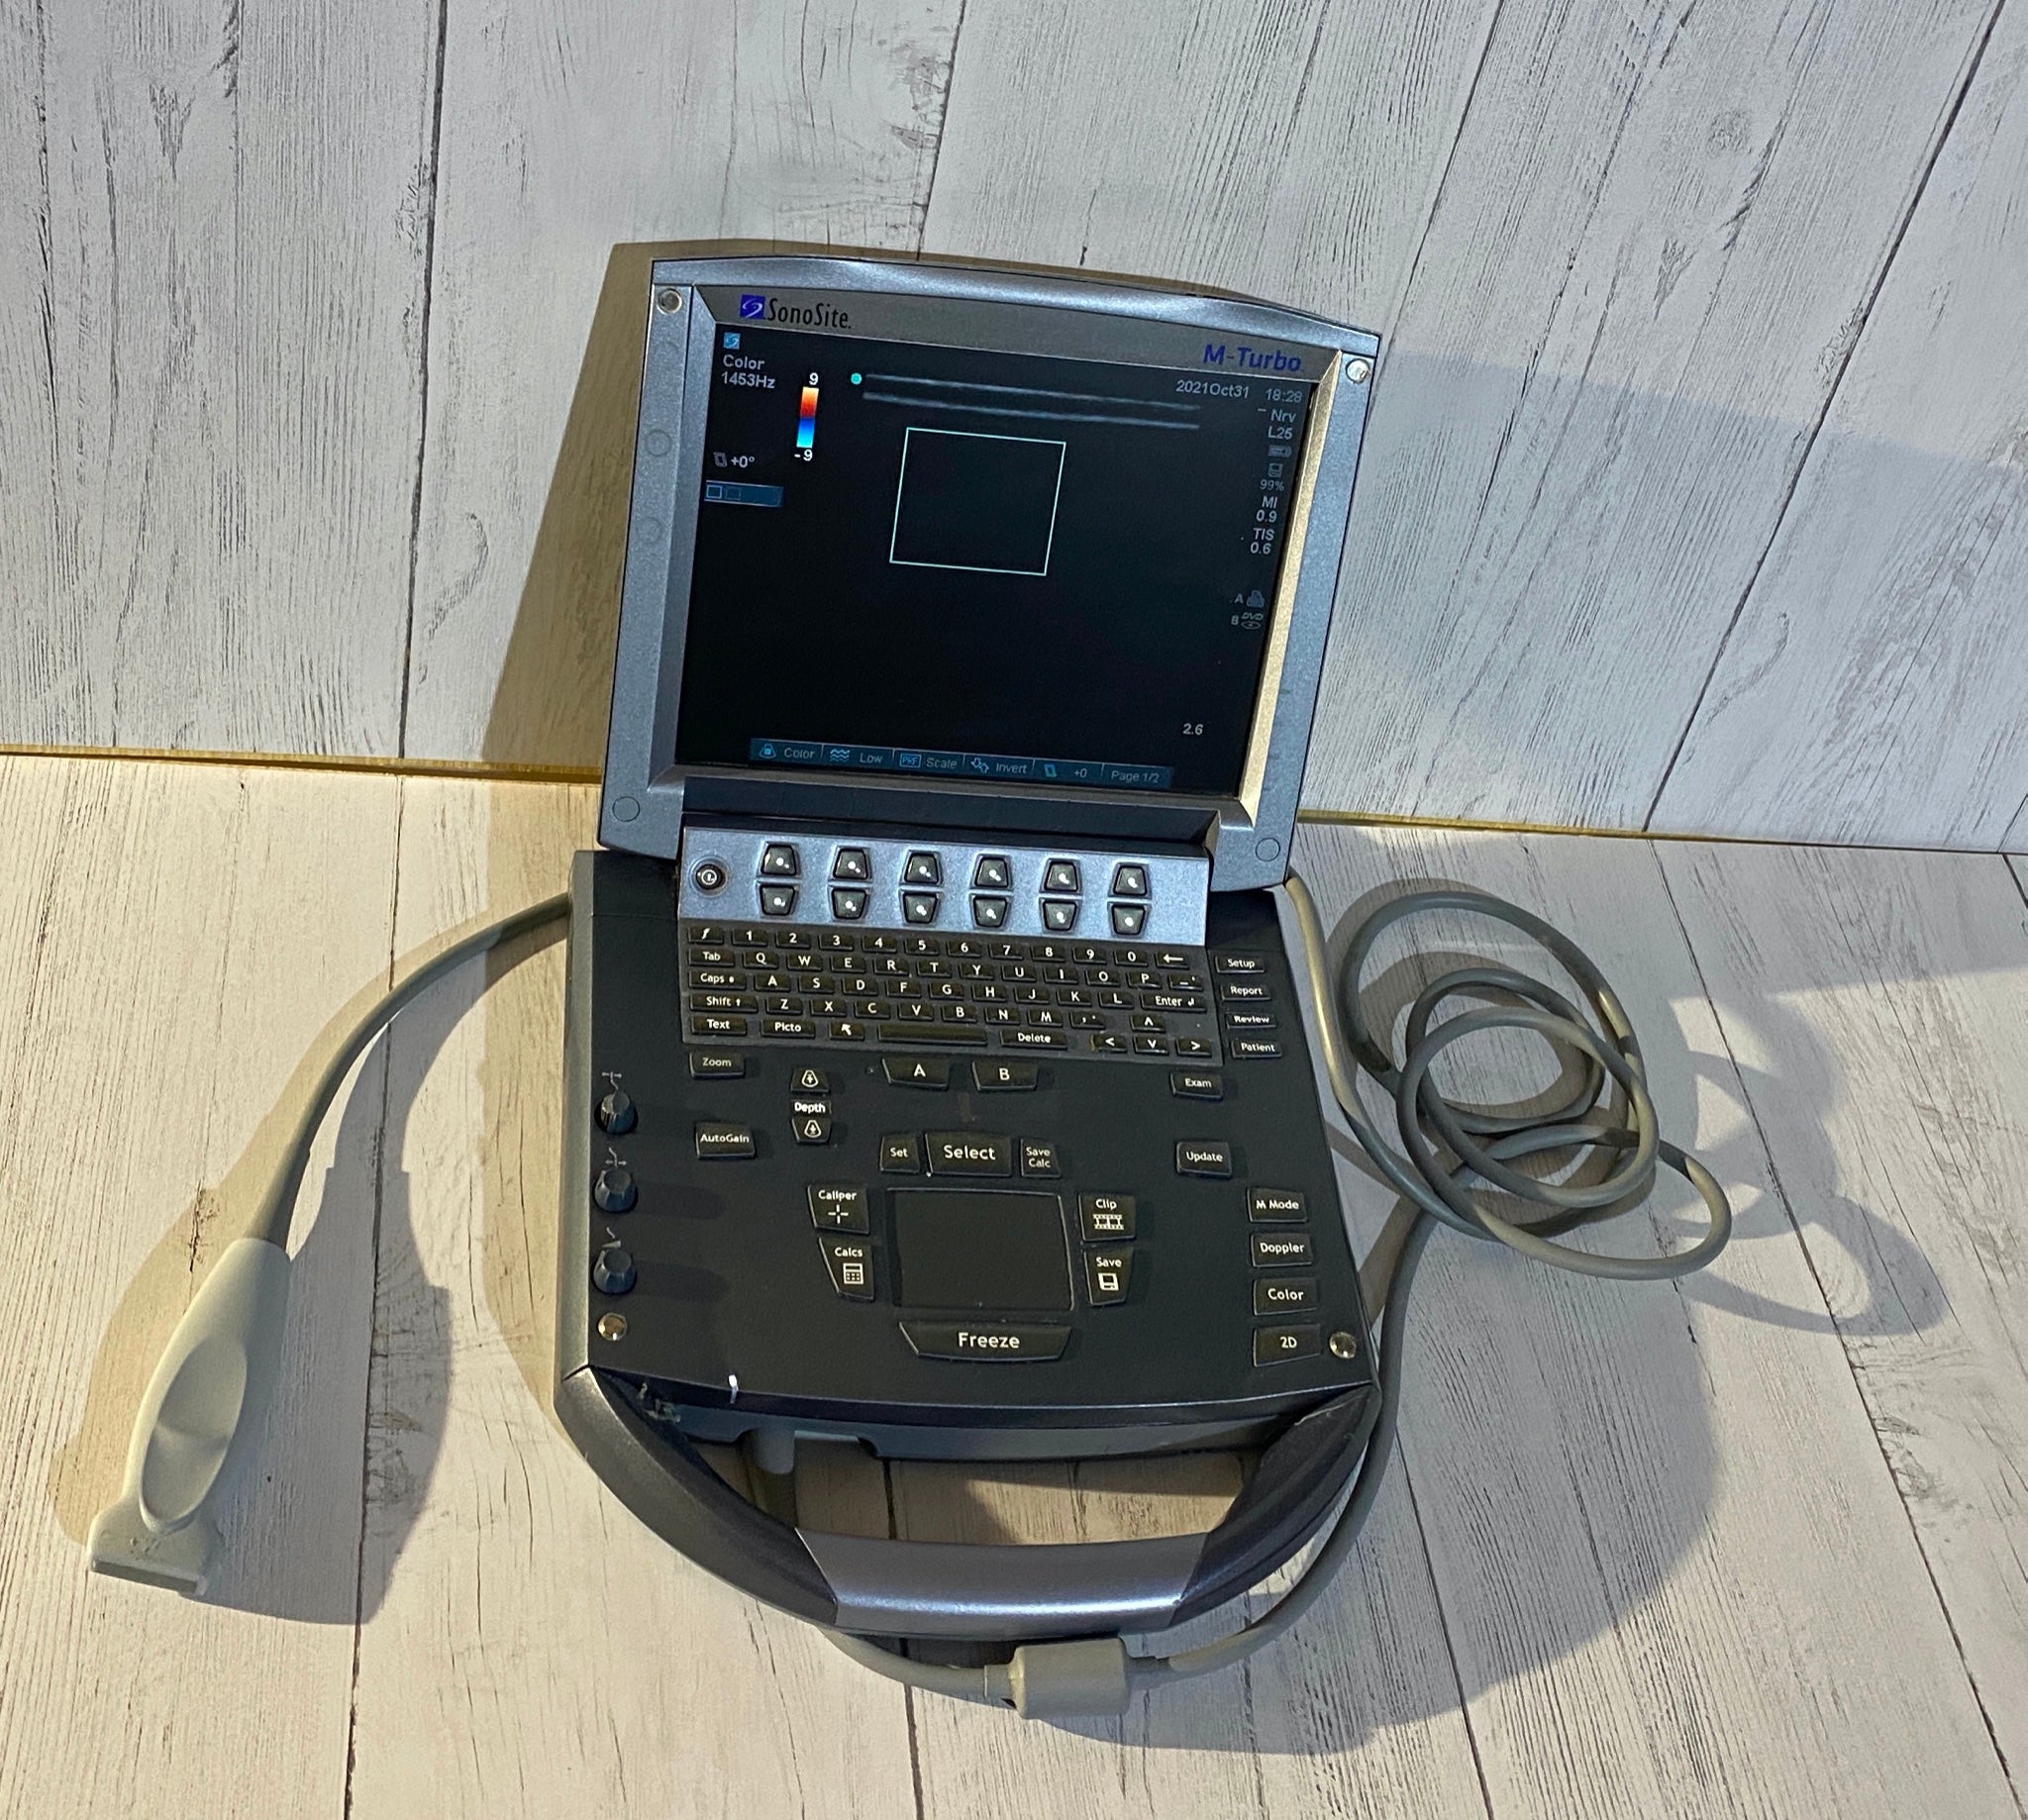 SonoSite M Turbo with one linear array probe L25 2008 DIAGNOSTIC ULTRASOUND MACHINES FOR SALE